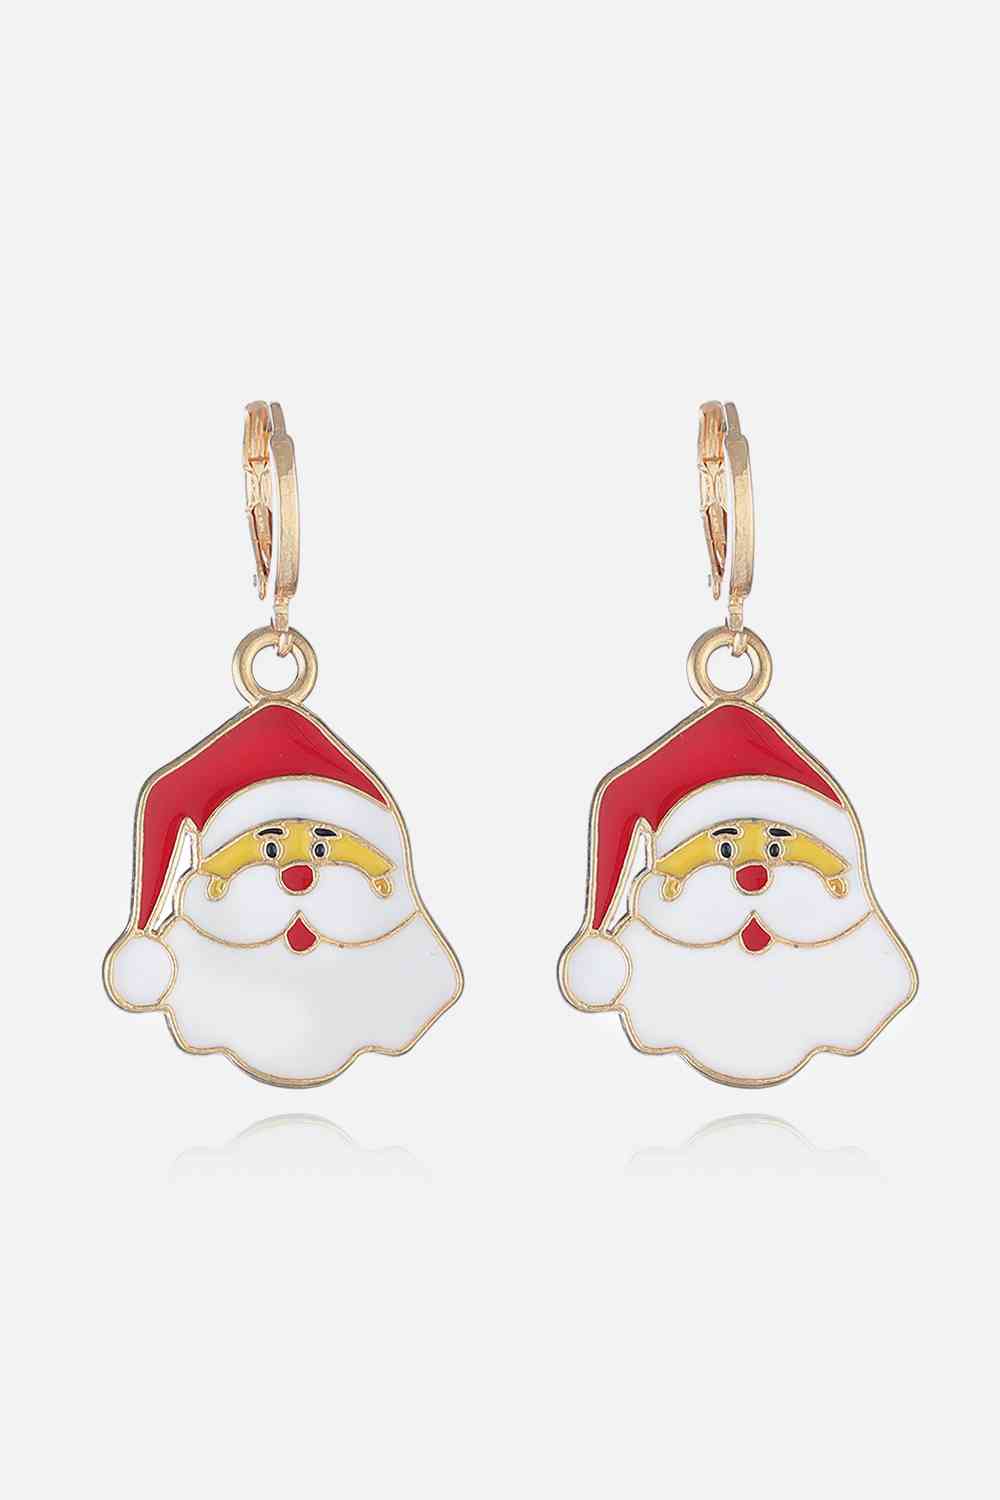 Christmas Alloy Earrings for Women Style A One Size